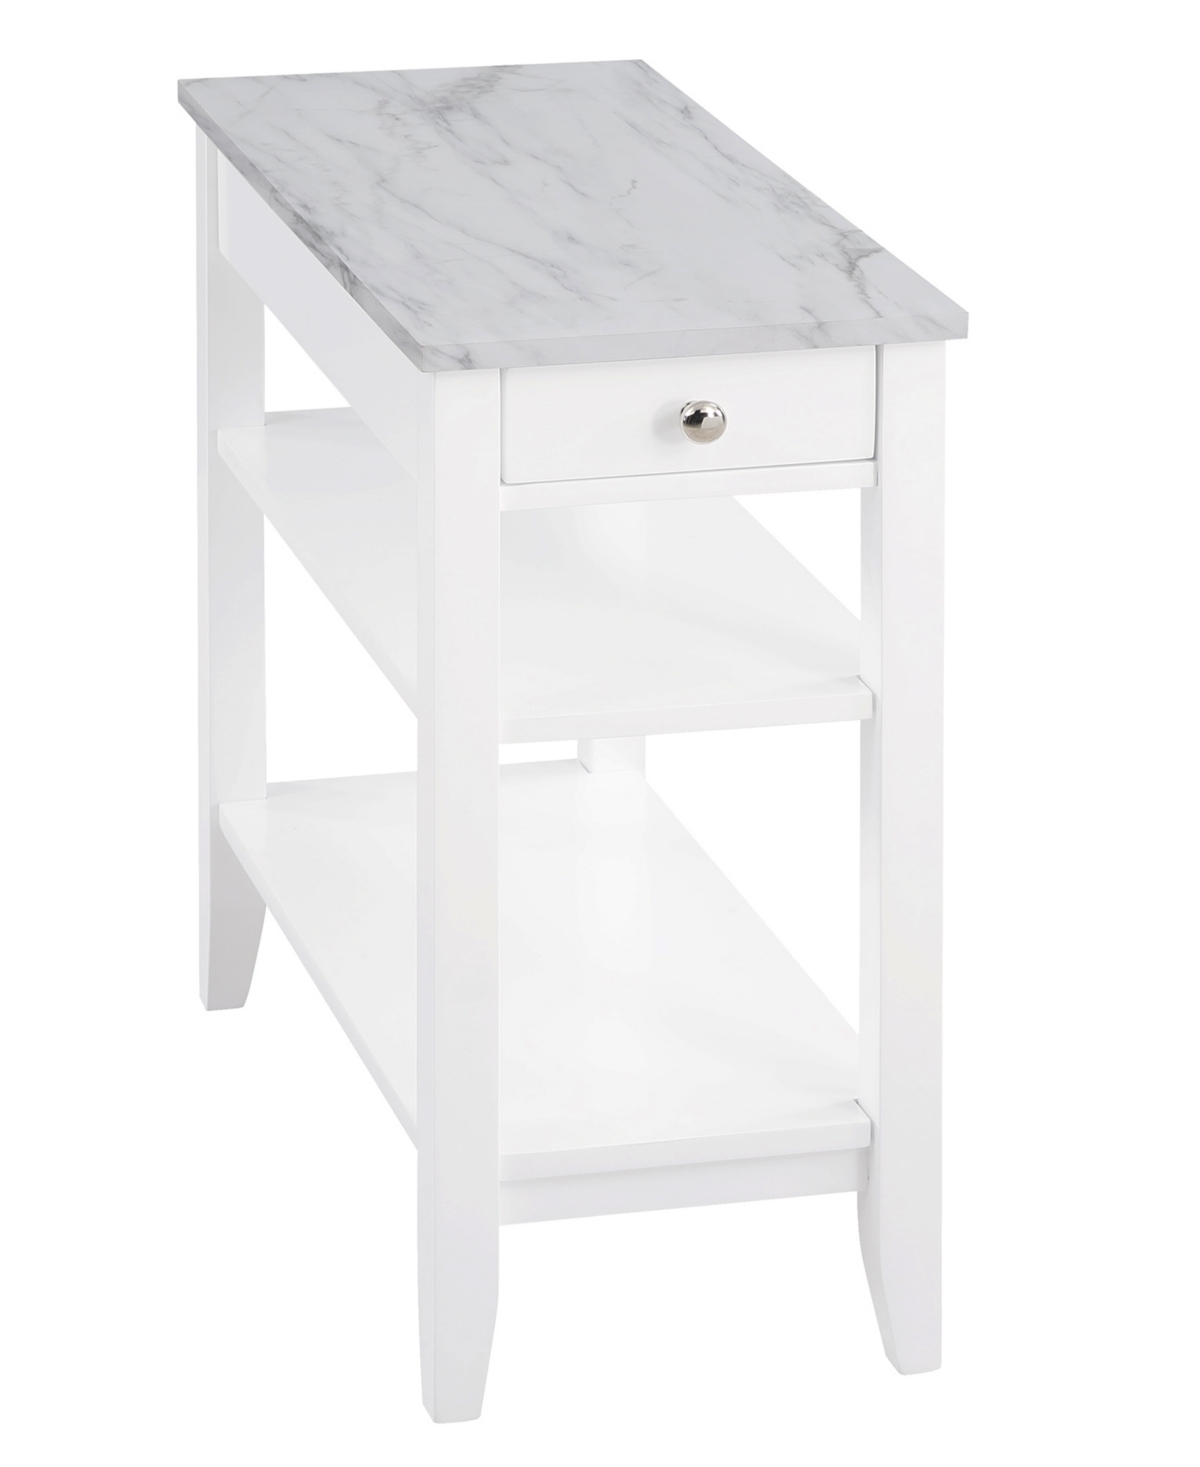 Convenience Concepts 23.5" Mdf Ah 1 Drawer Chairside End Table In White Faux Marble,white